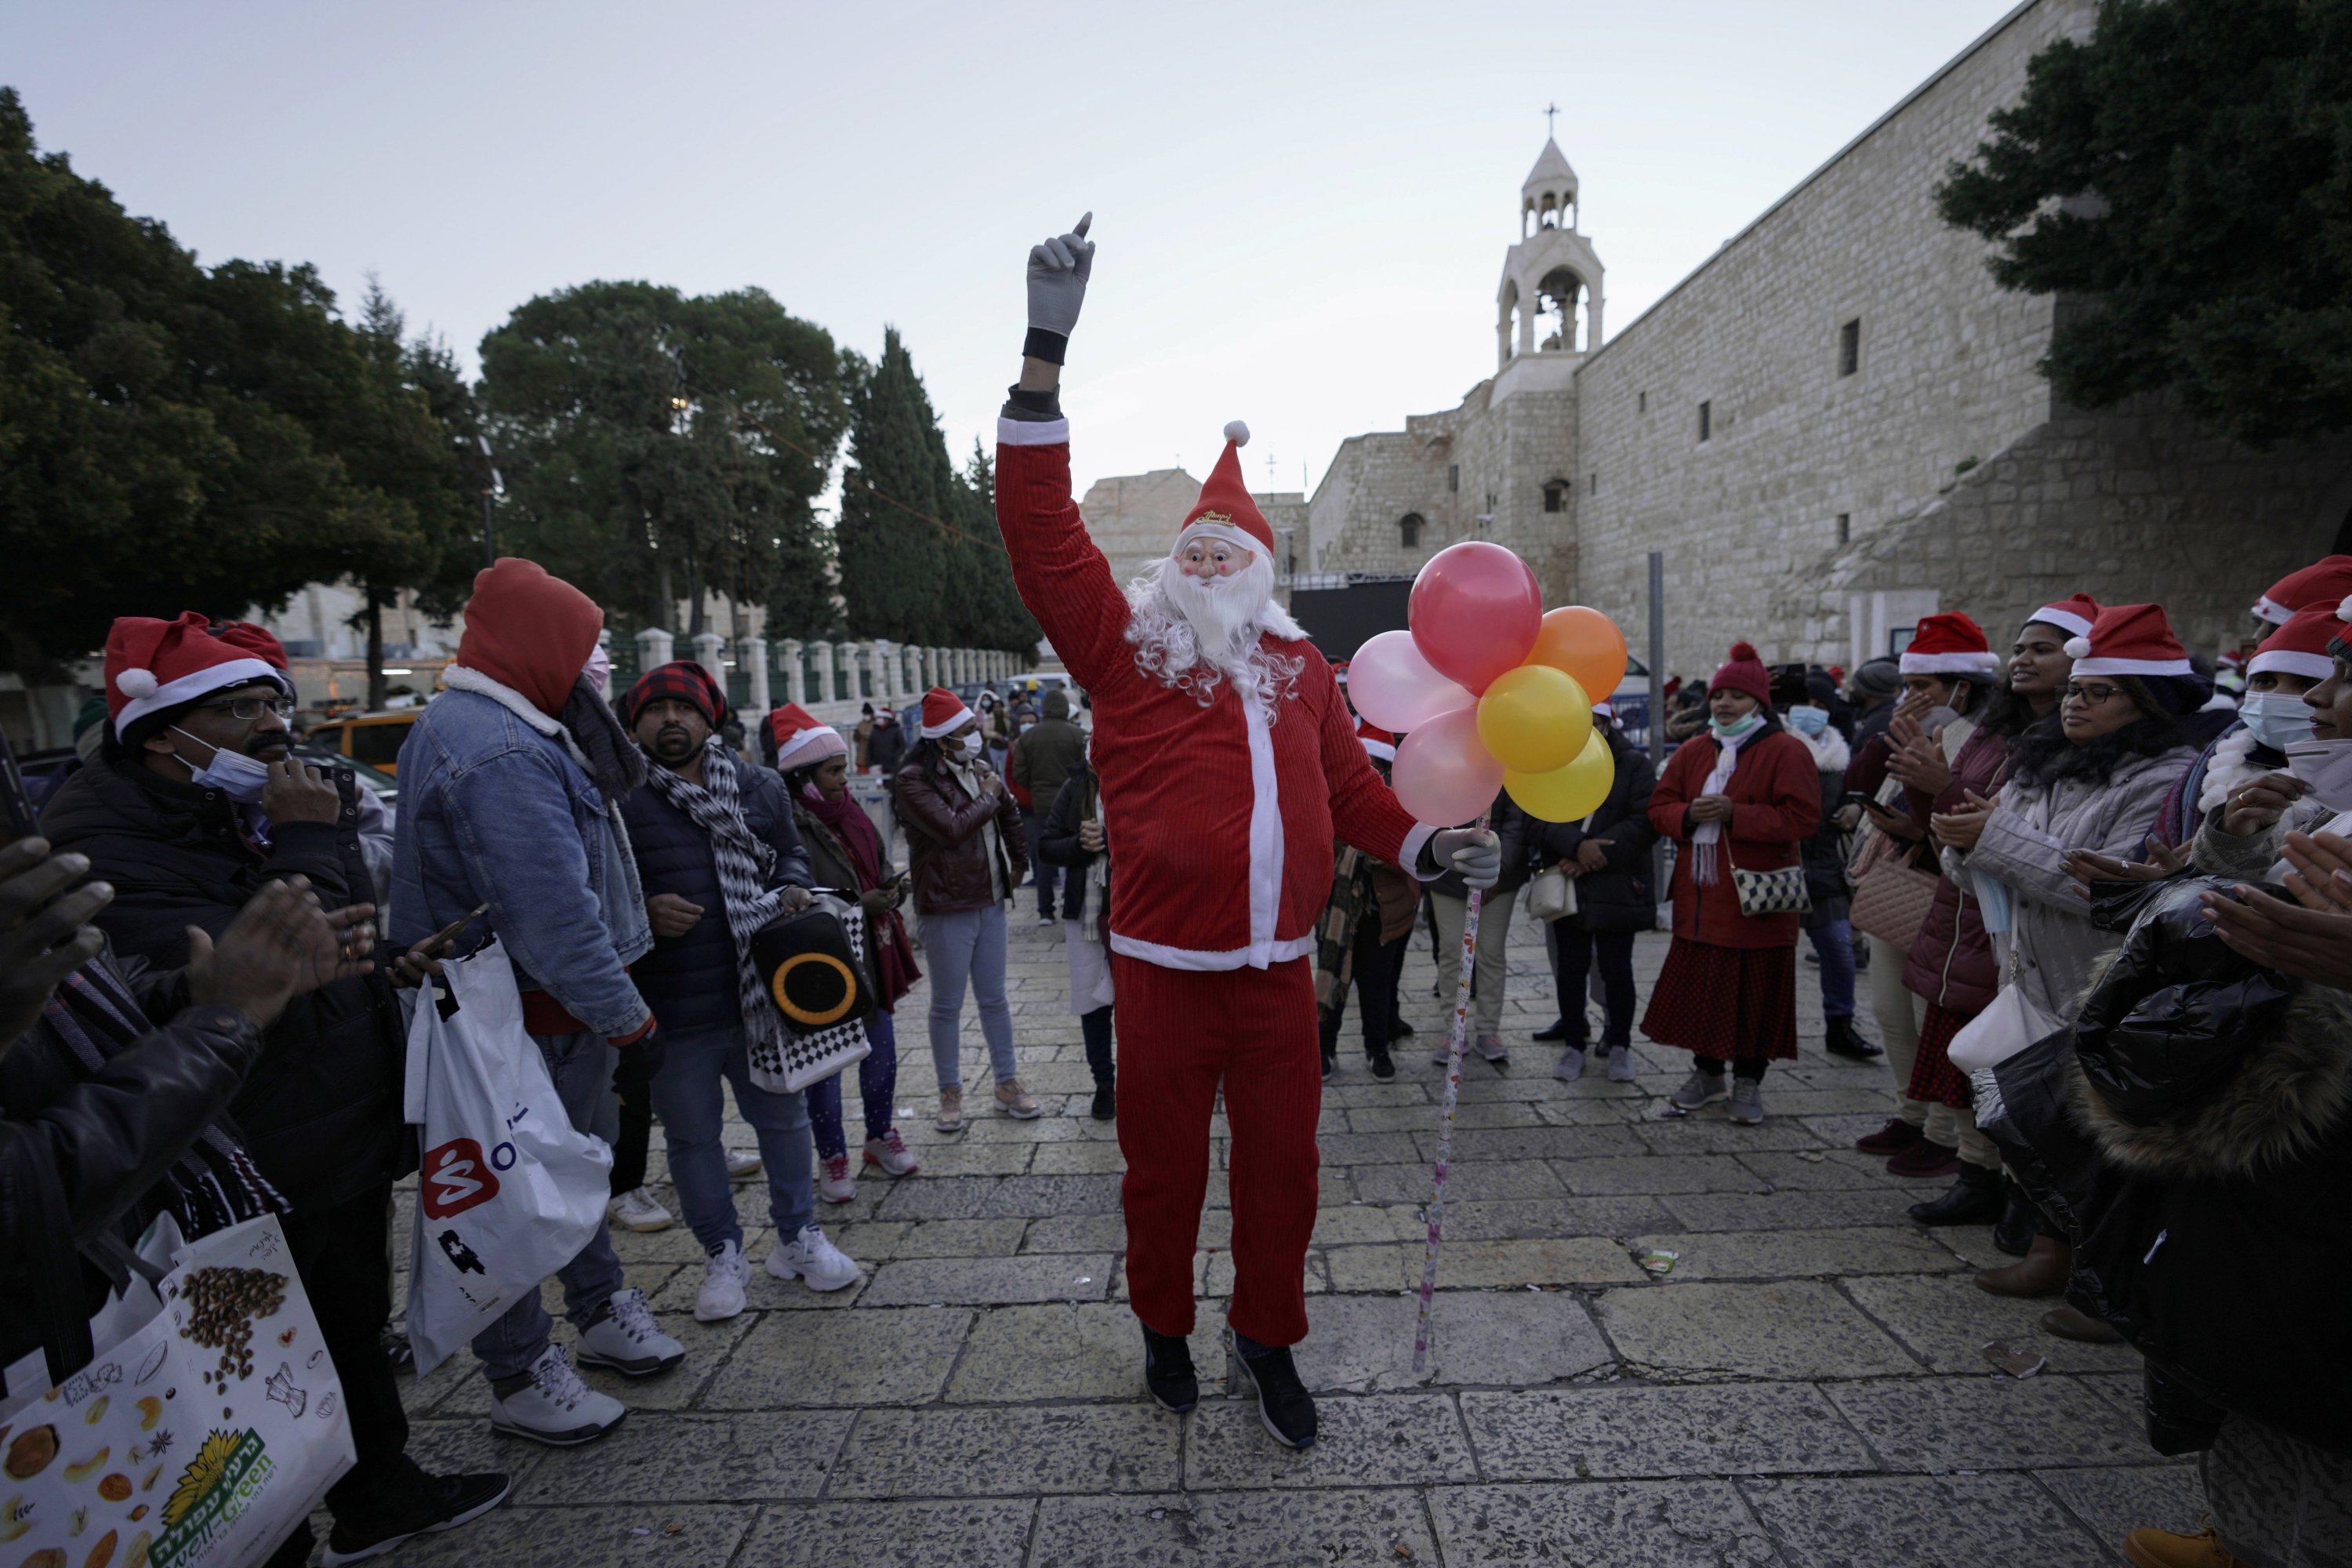 A man dressed as Santa Claus dances outside the Church of the Nativity, traditionally believed to be the birthplace of Jesus Christ, on Christmas Day in the West Bank city of Bethlehem, Palestine, Dec. 25, 2021. (AP Photo)